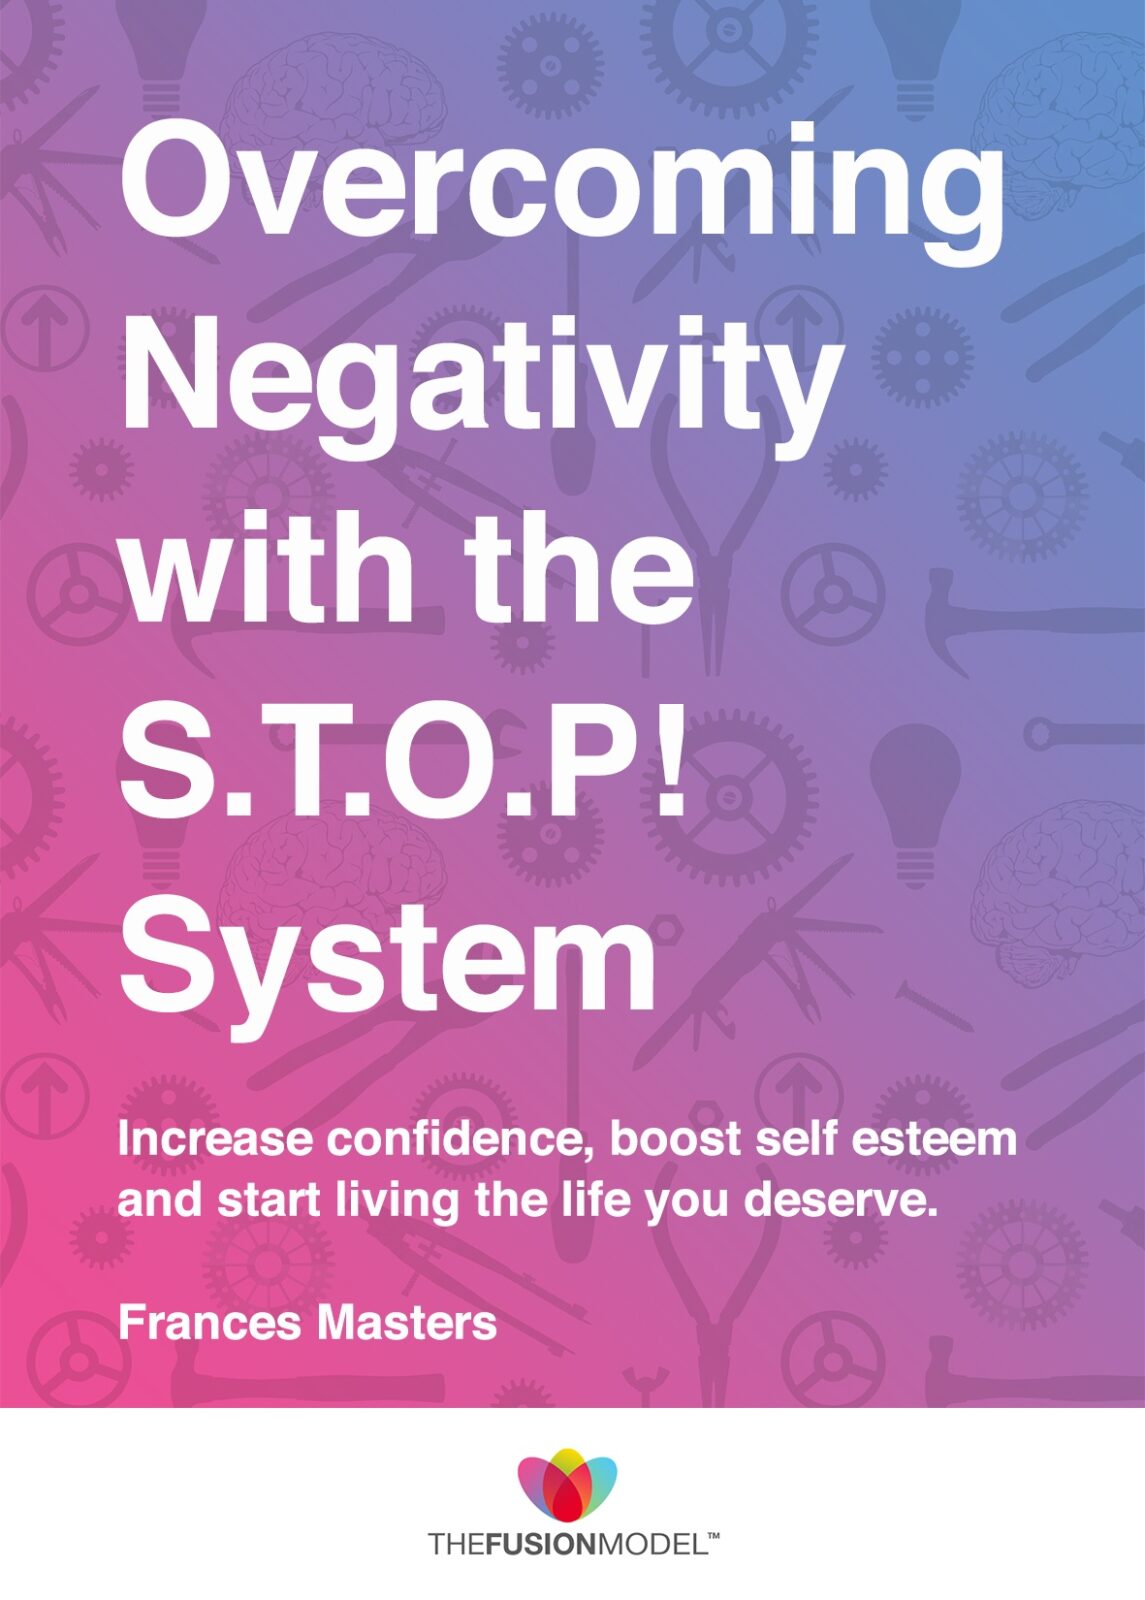 Increase confidence, boost self esteem and start living the life you deserve.